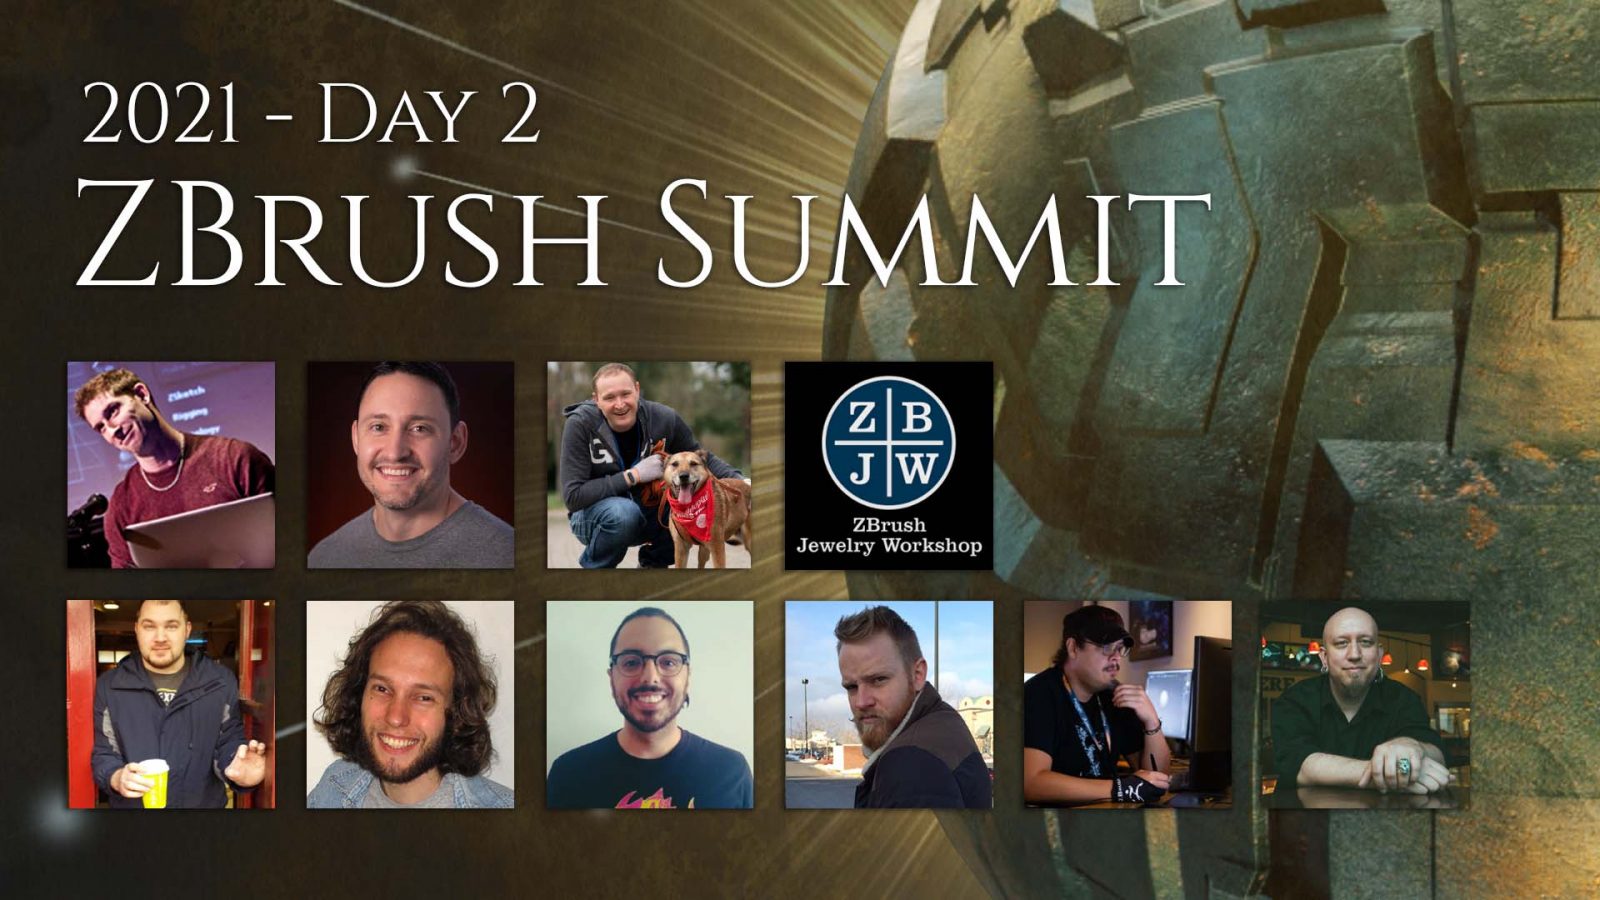 when is the zbrush summit